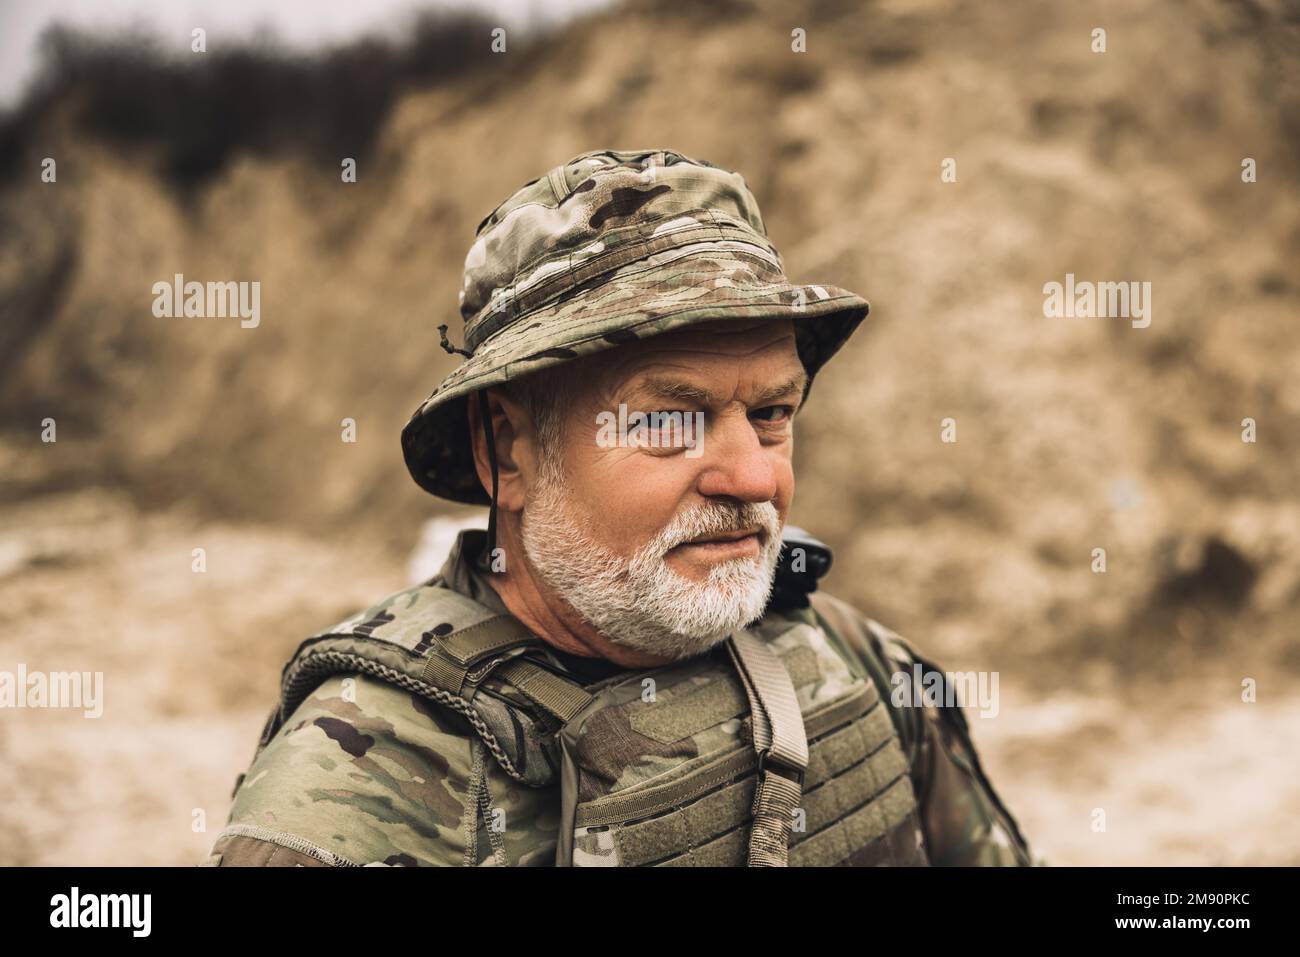 Mature bearded soldier on a shooting range Stock Photo